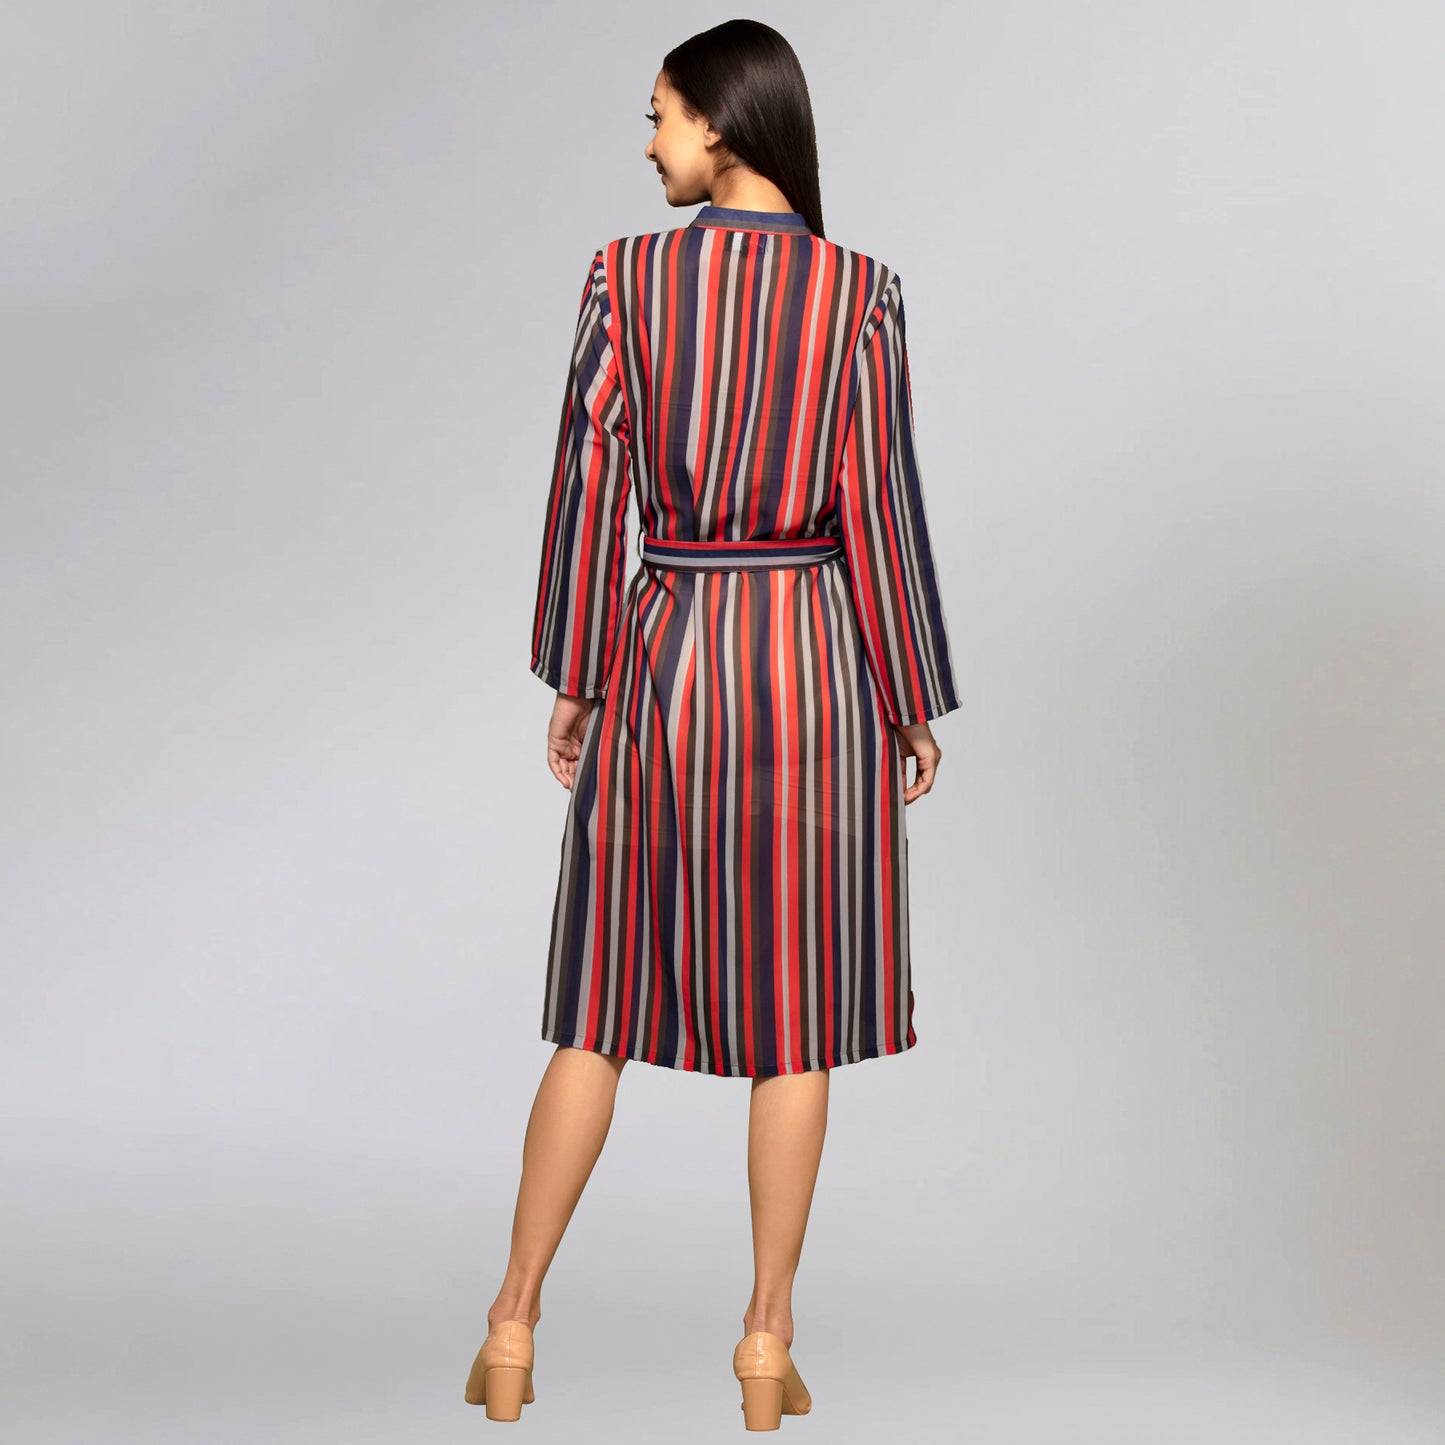 Vibrant Red and Black Striped Shirt Dress